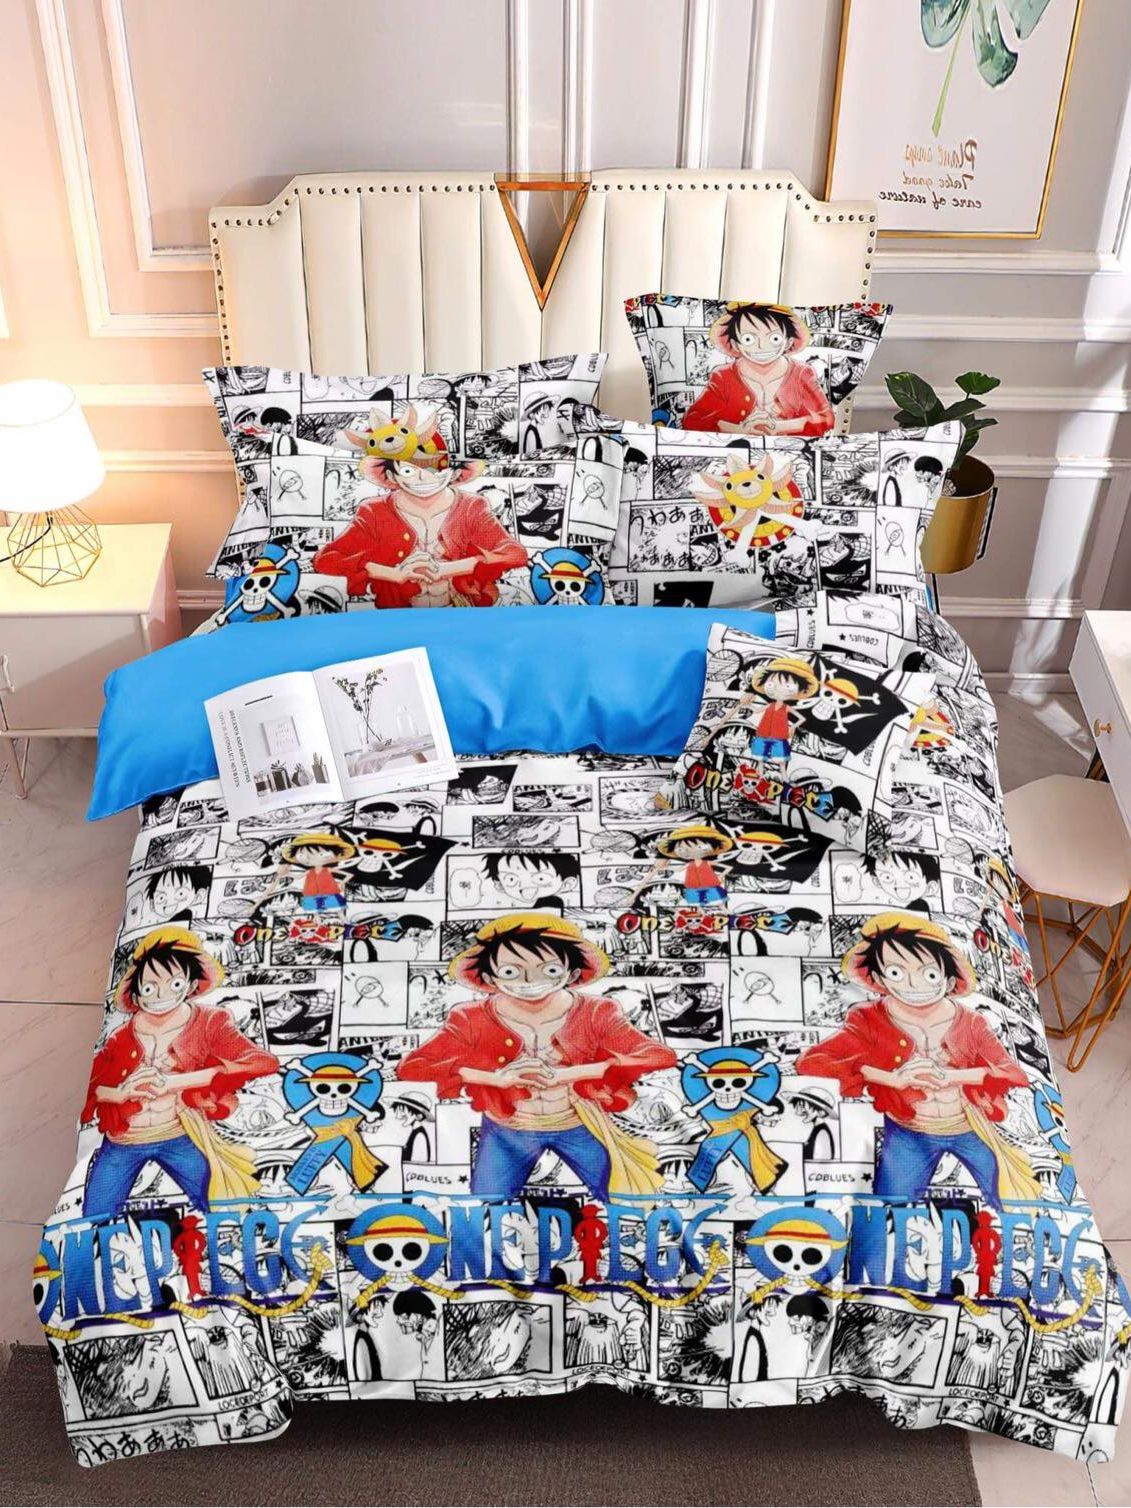 Anime One Piece Wanted Wallpaper Dead Or Alive Monkey D Luffy Shanks  Marshall D Teach Buggy Posters Figure Kids Room Decoration - AliExpress